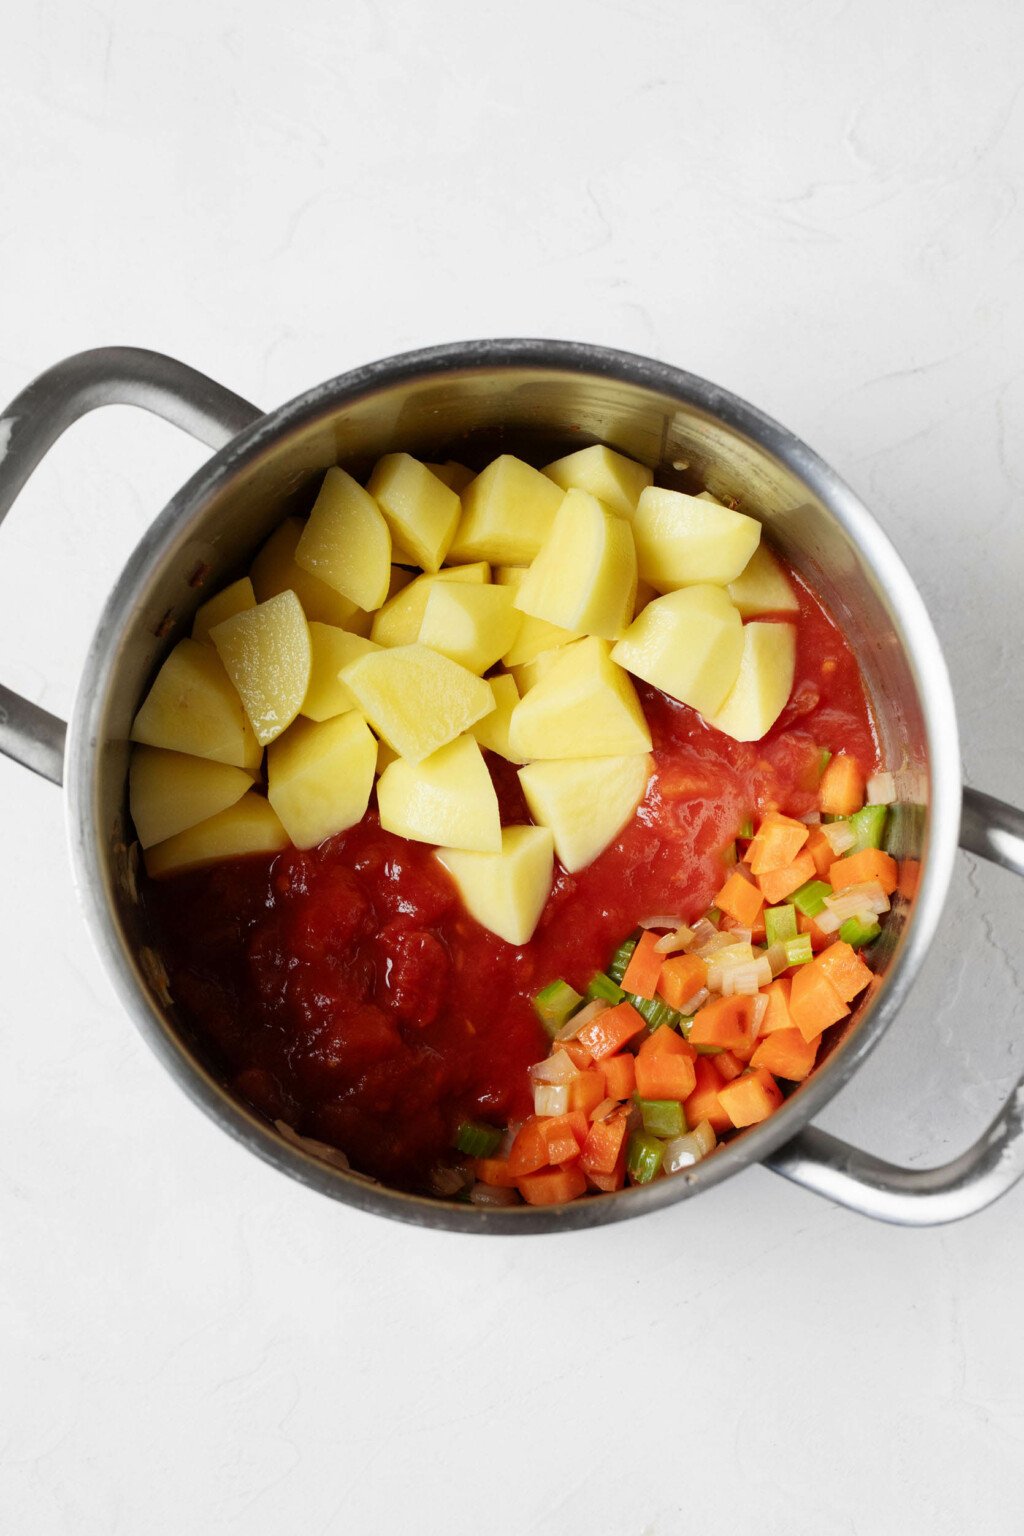 Onion, celery, carrots, garlic, tomatoes, and potatoes are pictured overhead in a silver soup pot. It rests on a white surface.